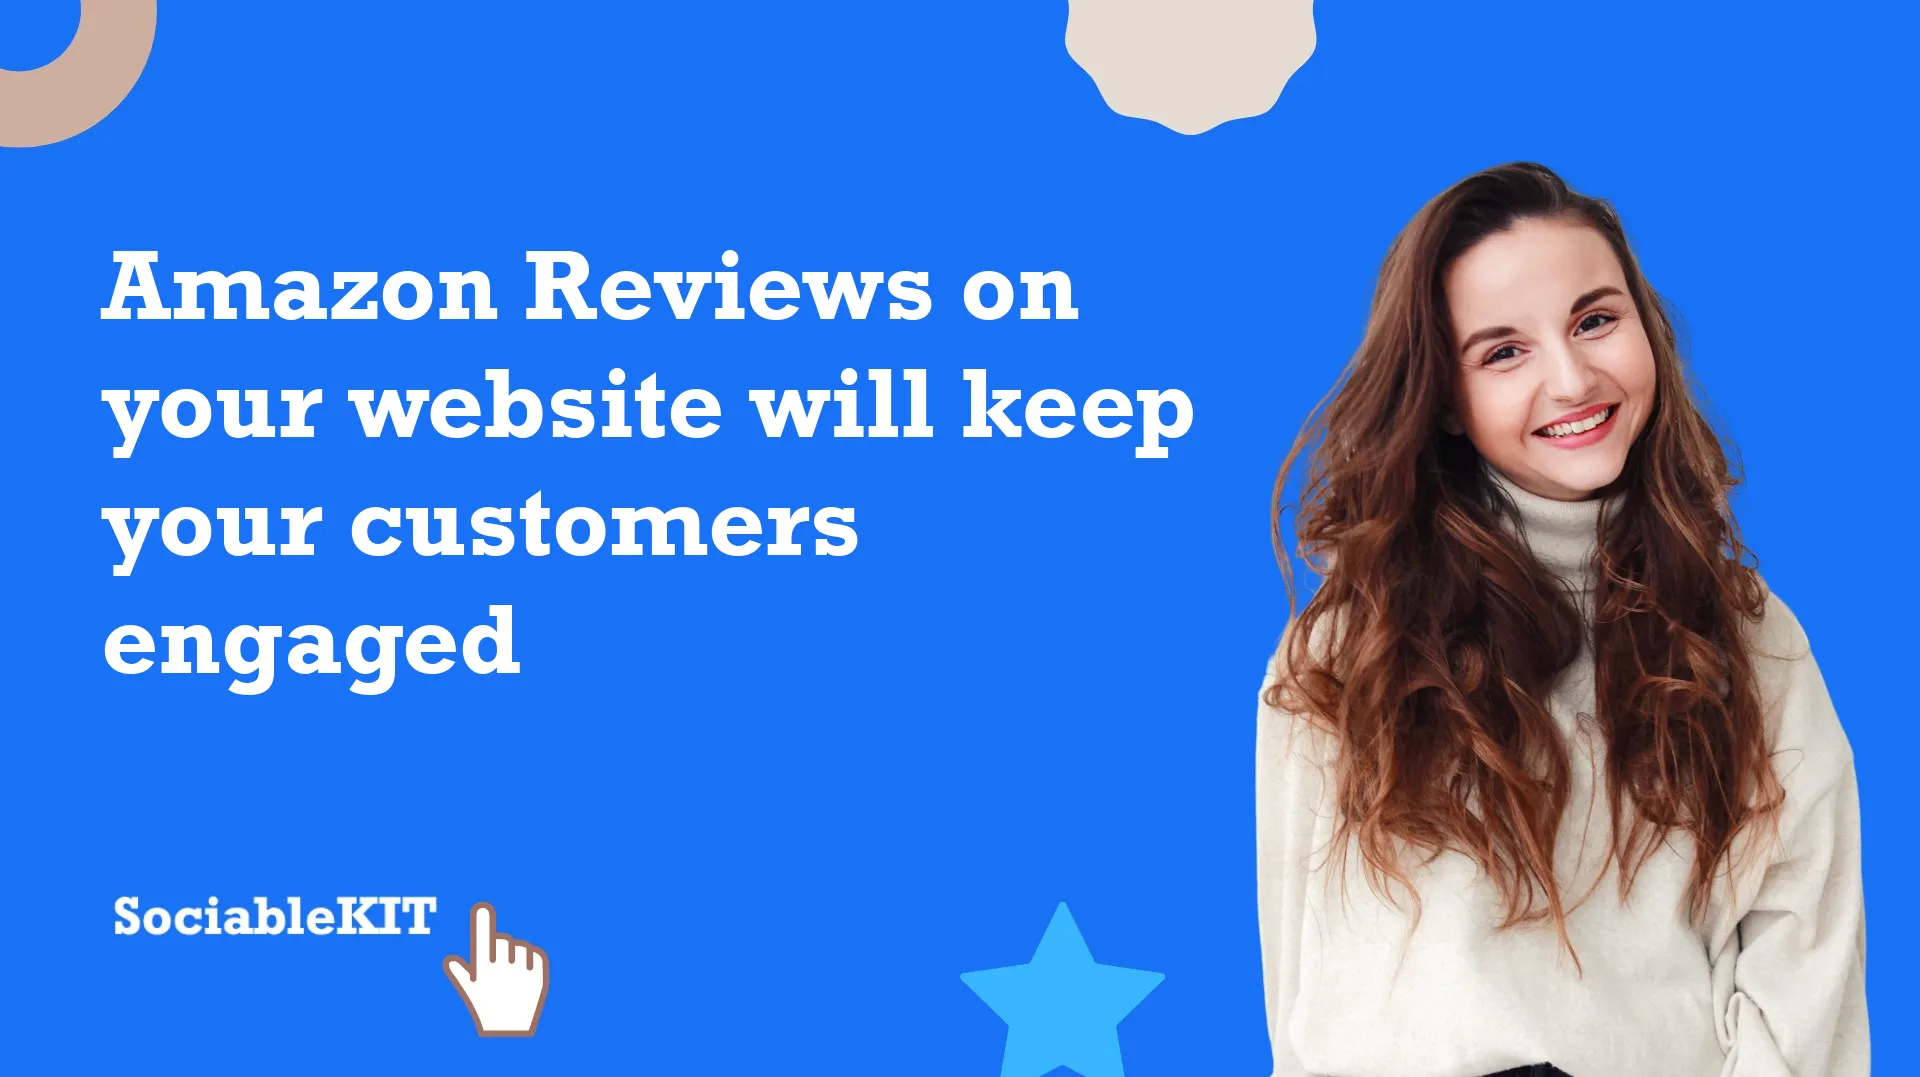 Amazon Reviews on your website will keep your customers engaged